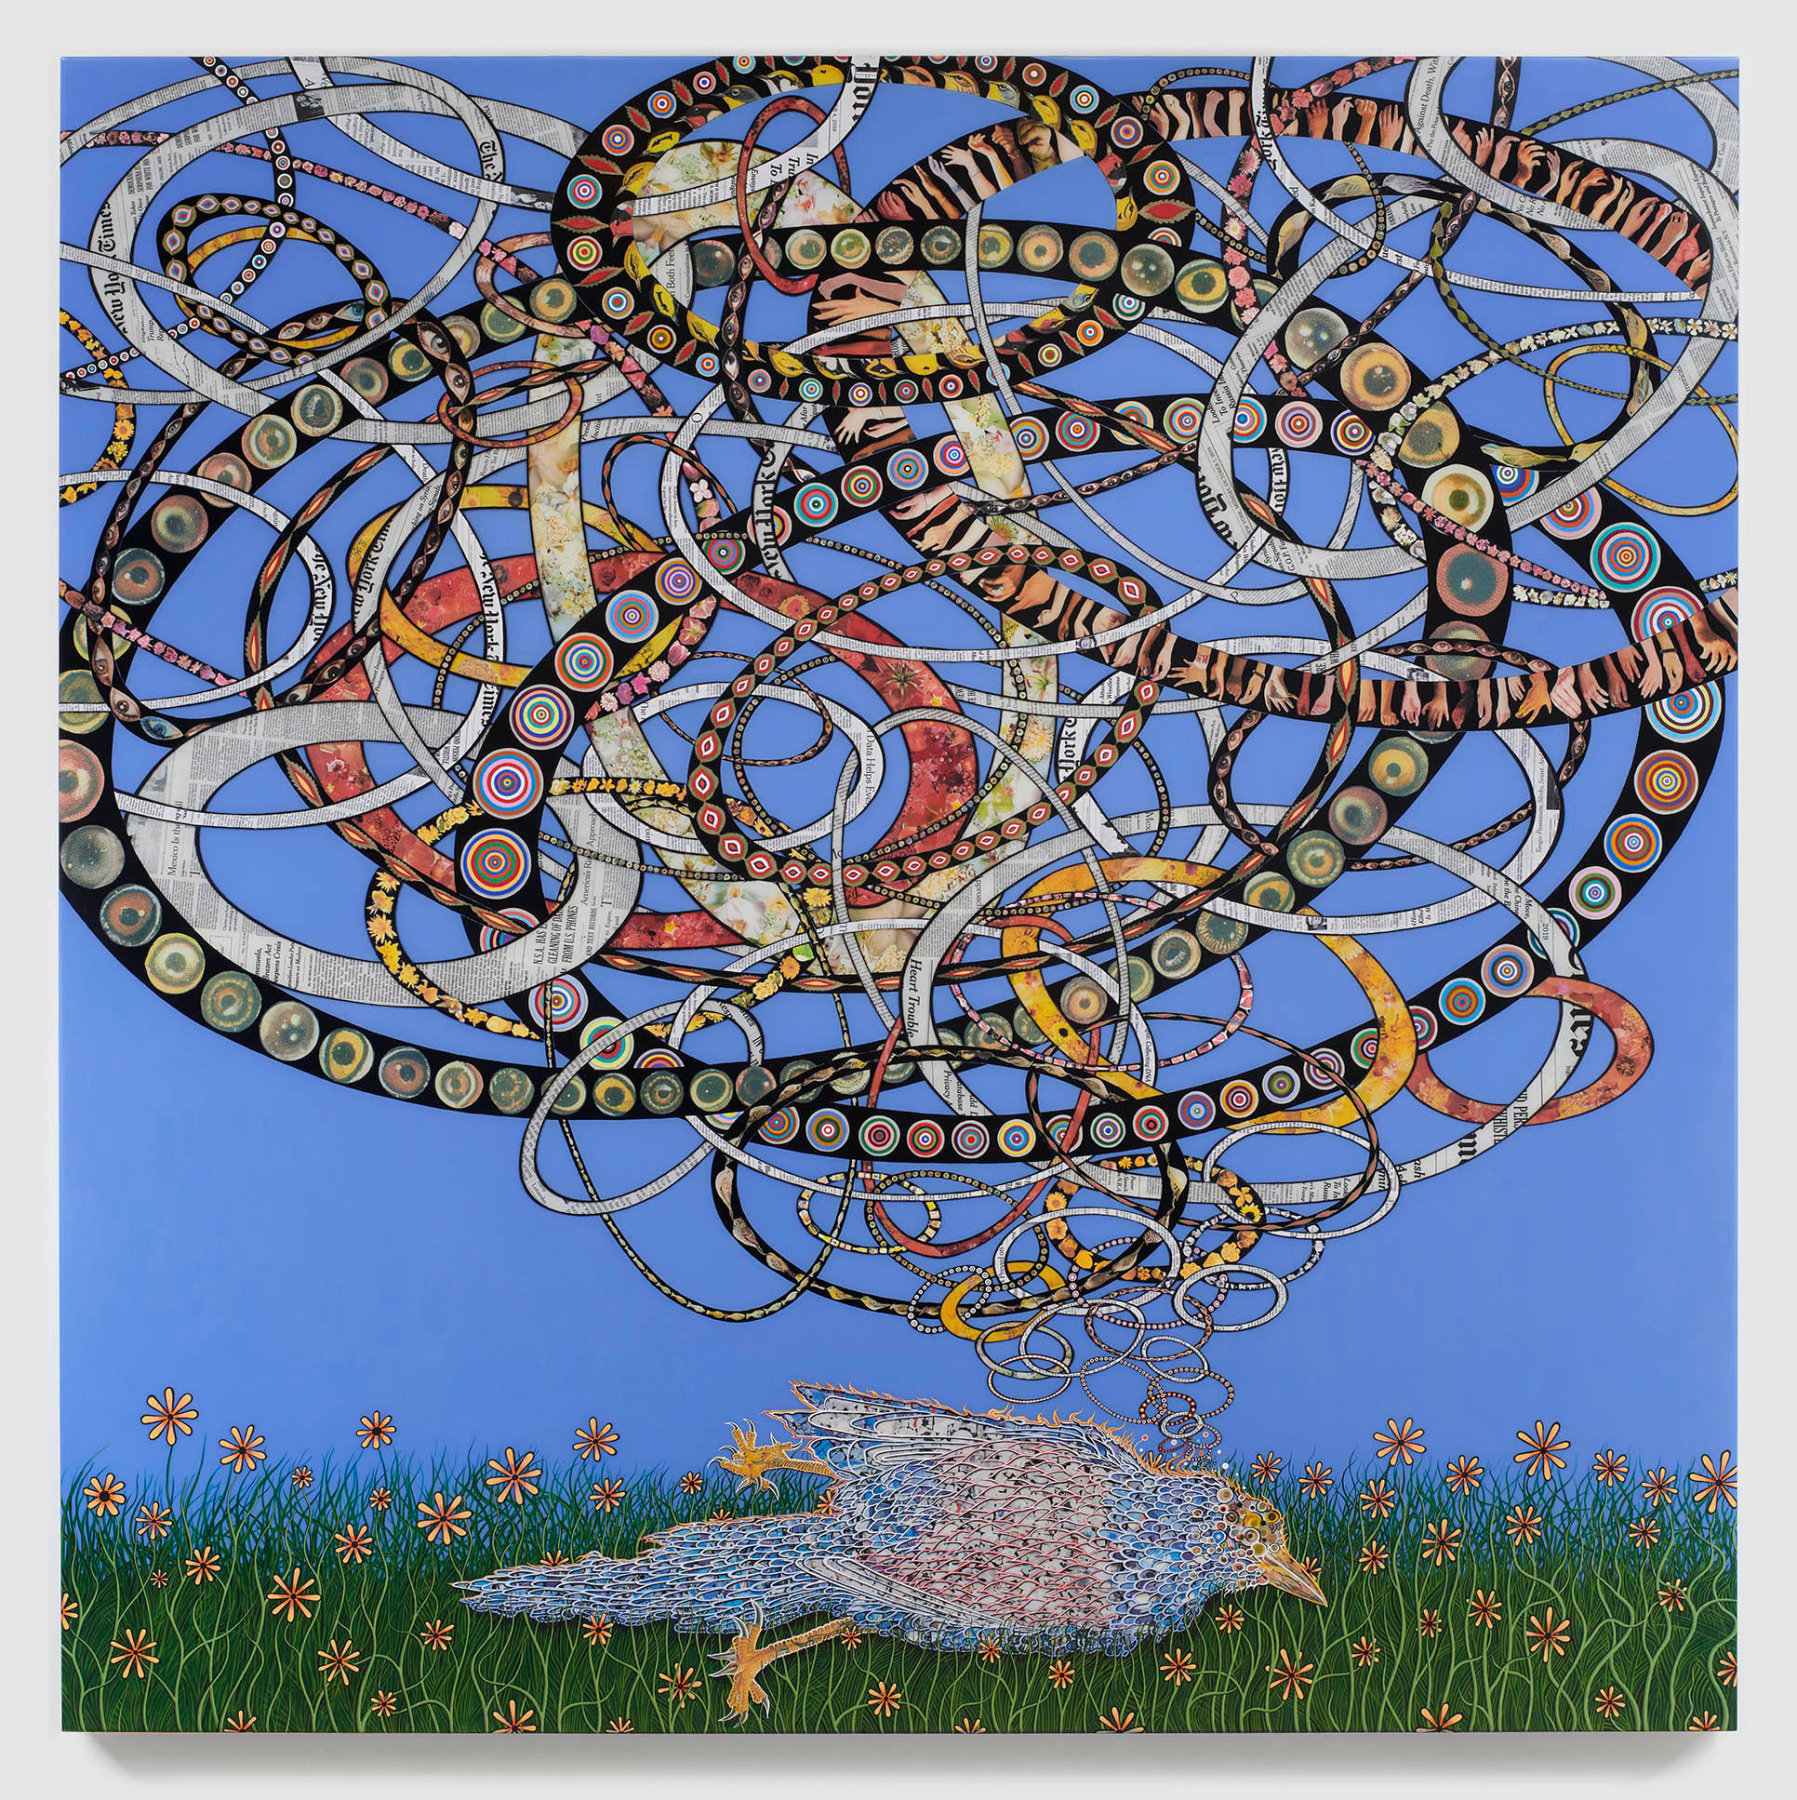 Image of FRED TOMASELLI's Untitled, 2020's